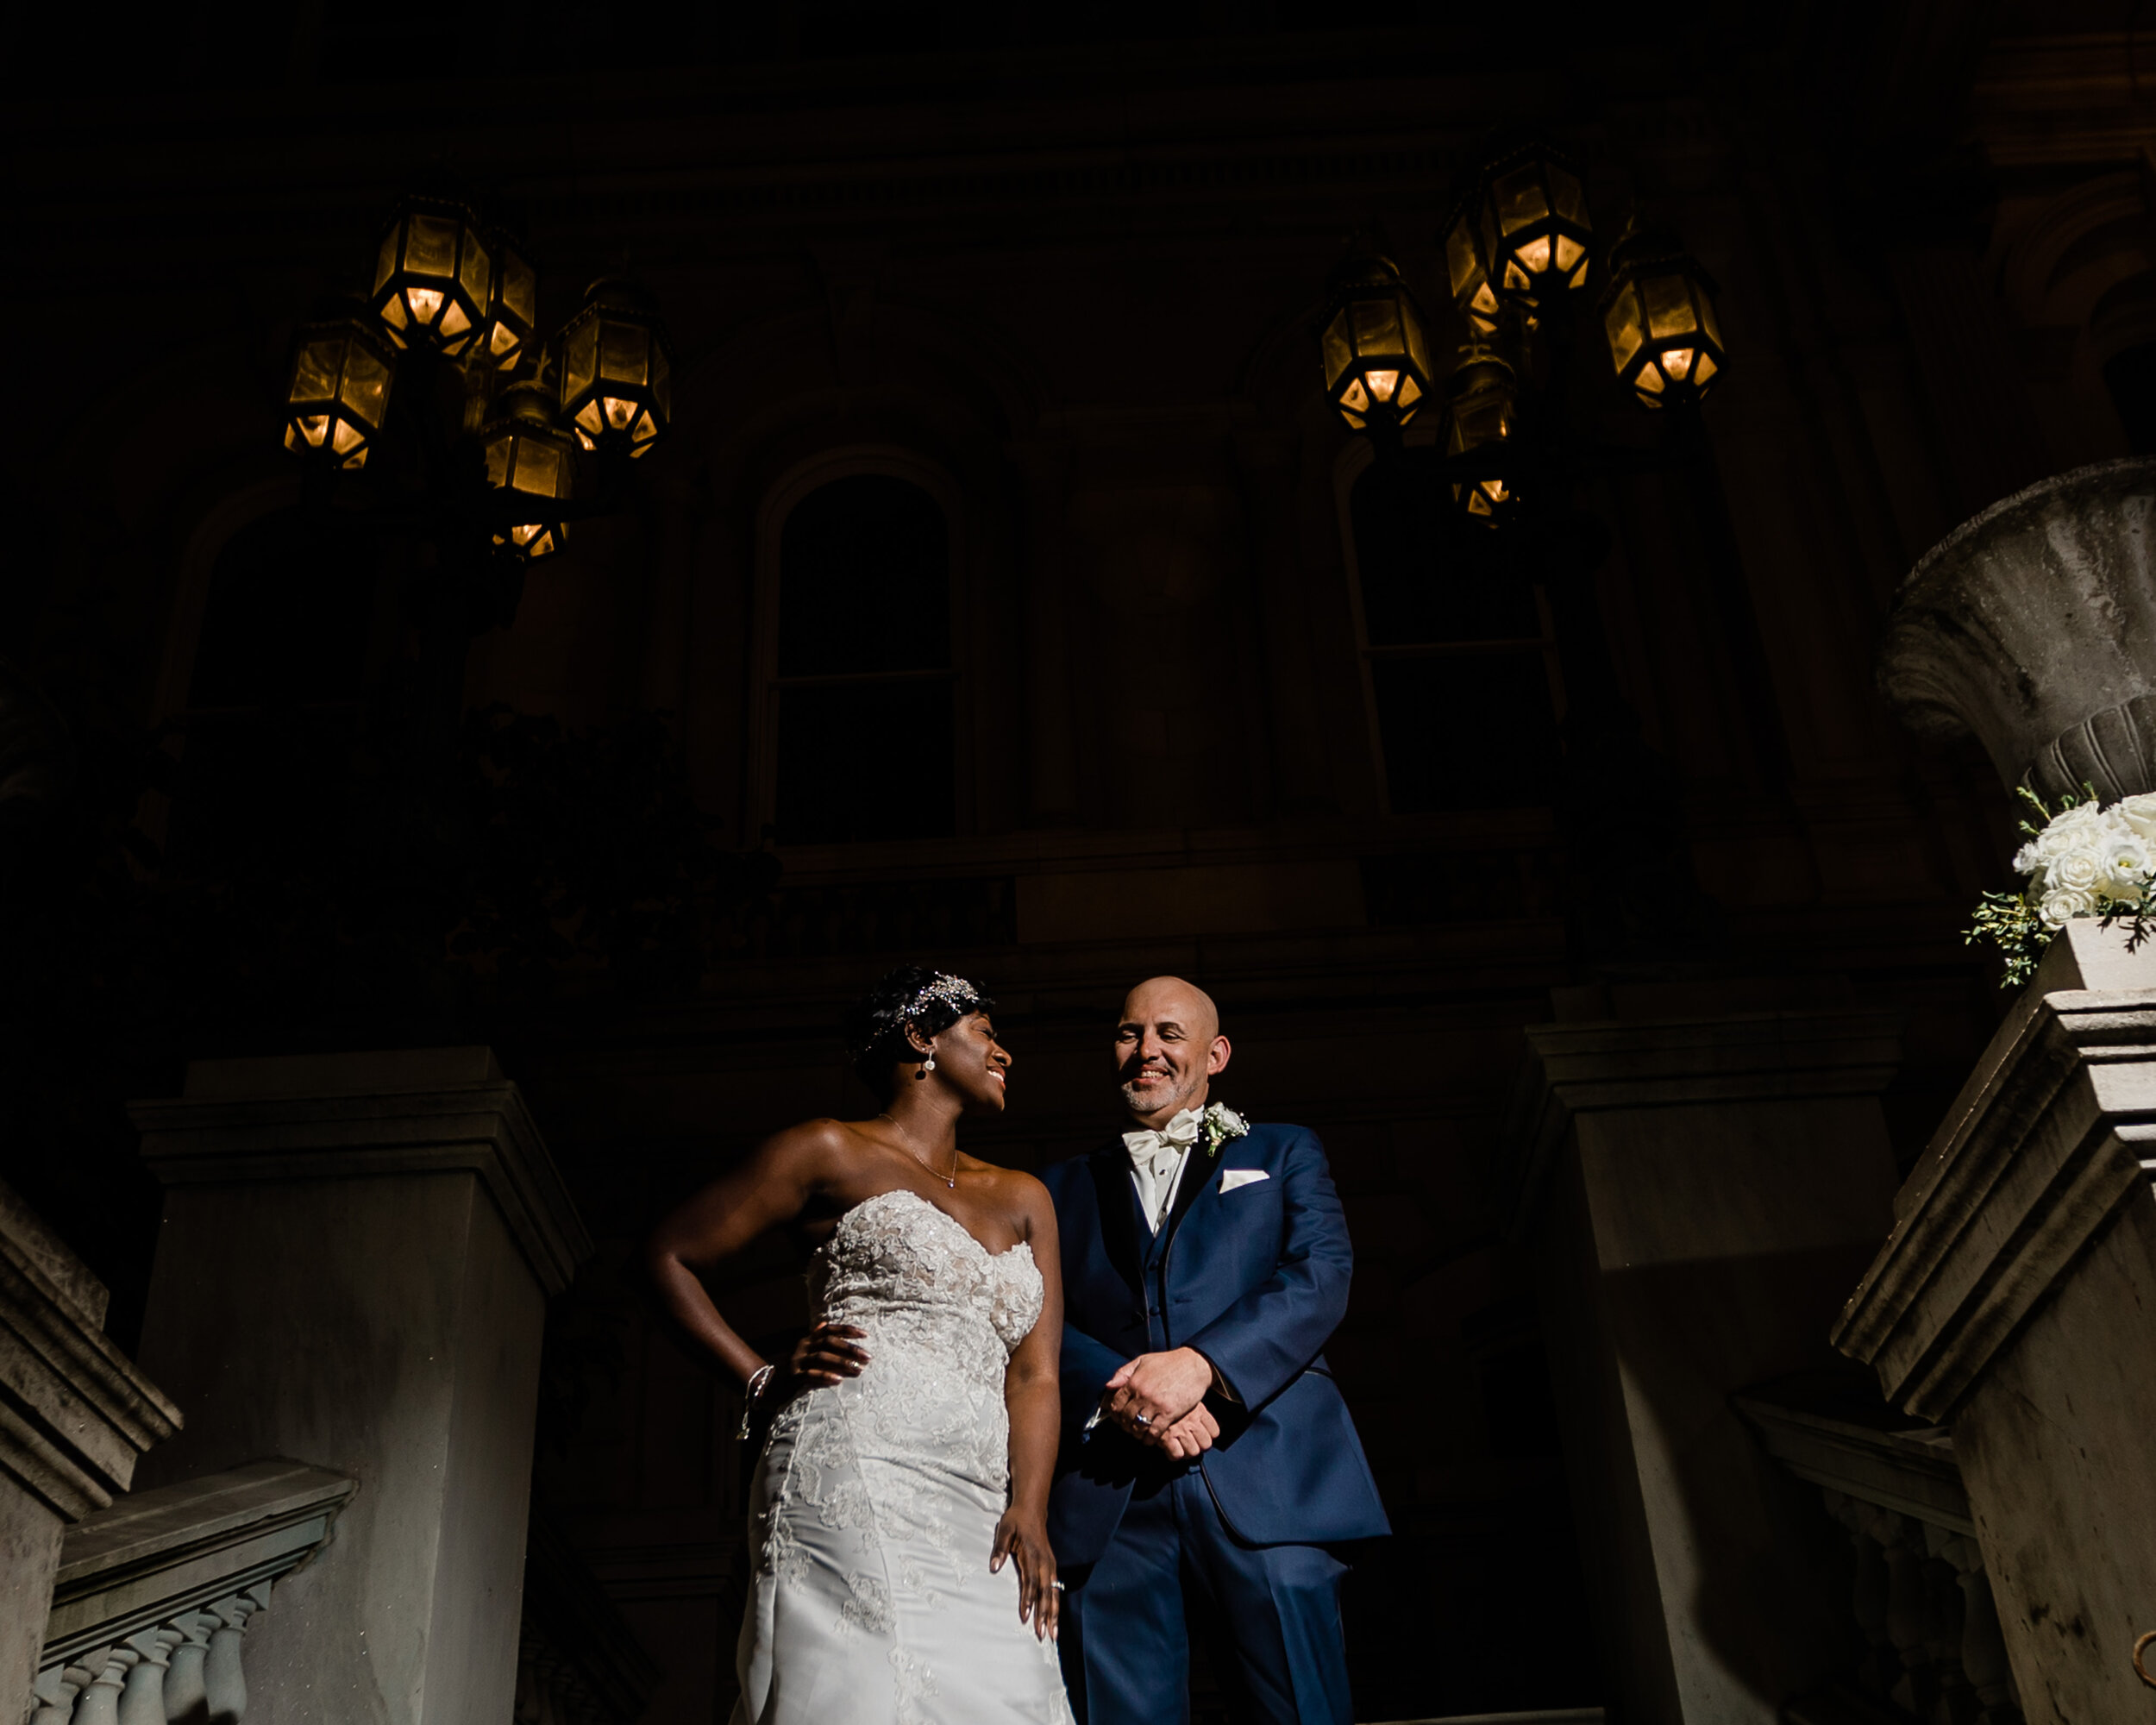 get married in baltimore city hall shot by megapixels media biracial couple wedding photographers maryland-93.jpg